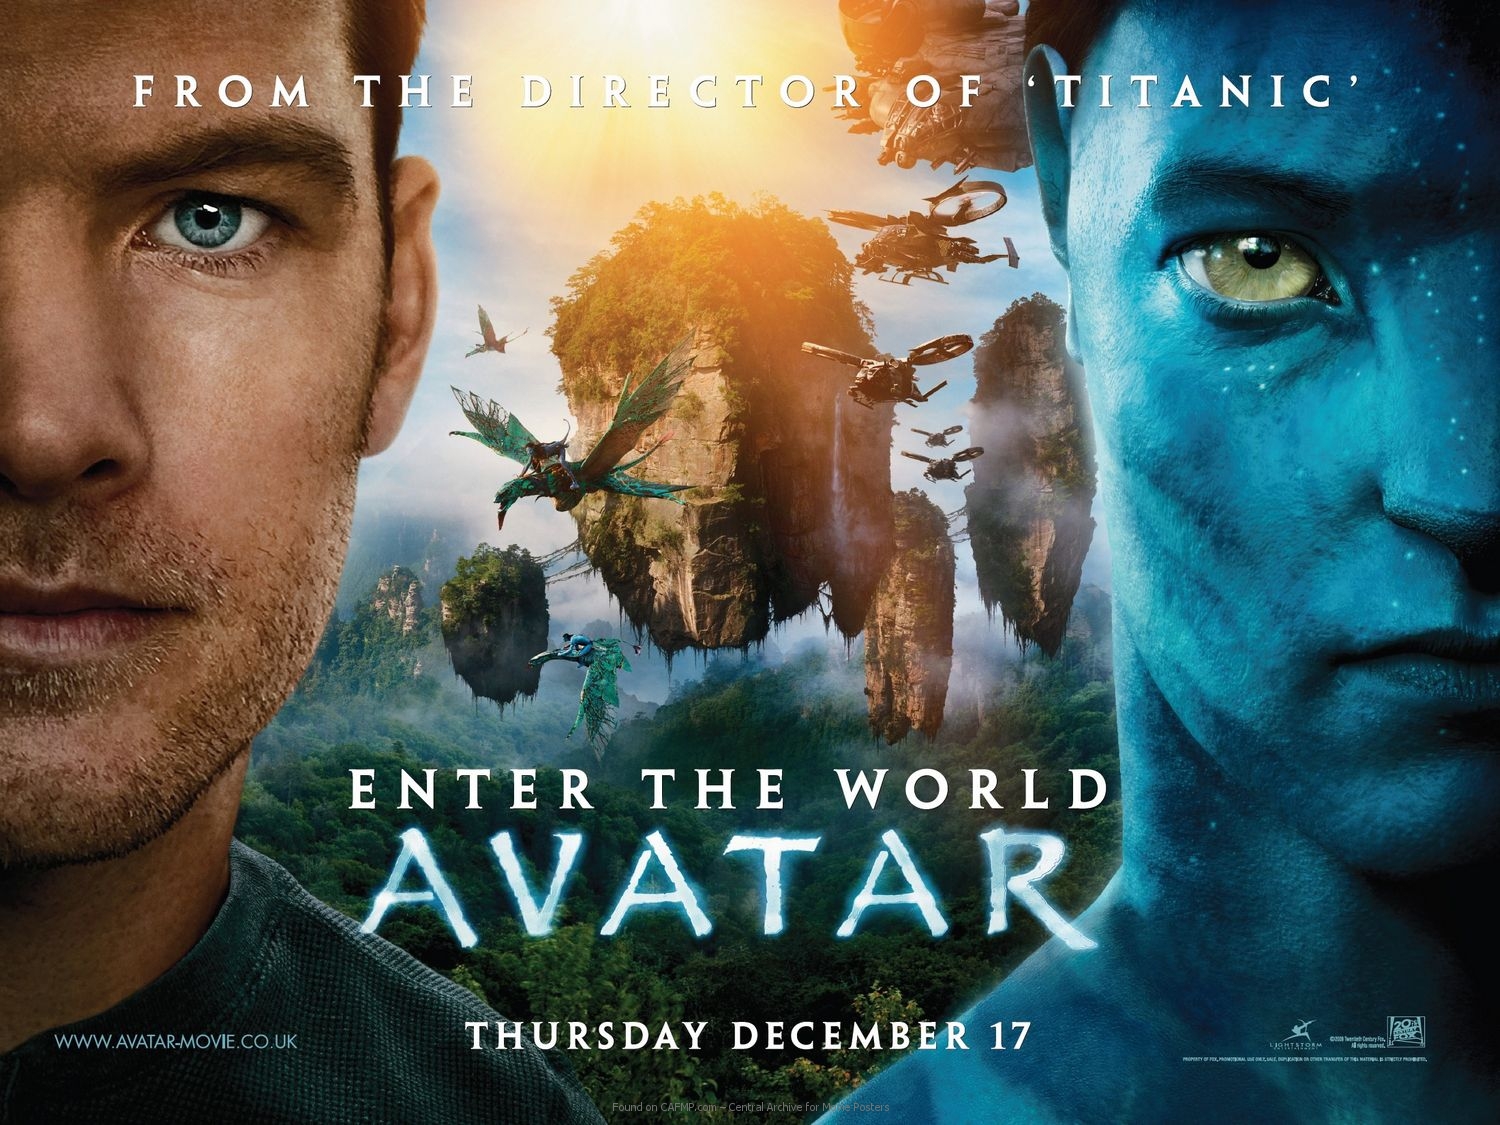 Movie Poster »Avatar - Enter the World« on CAFMP